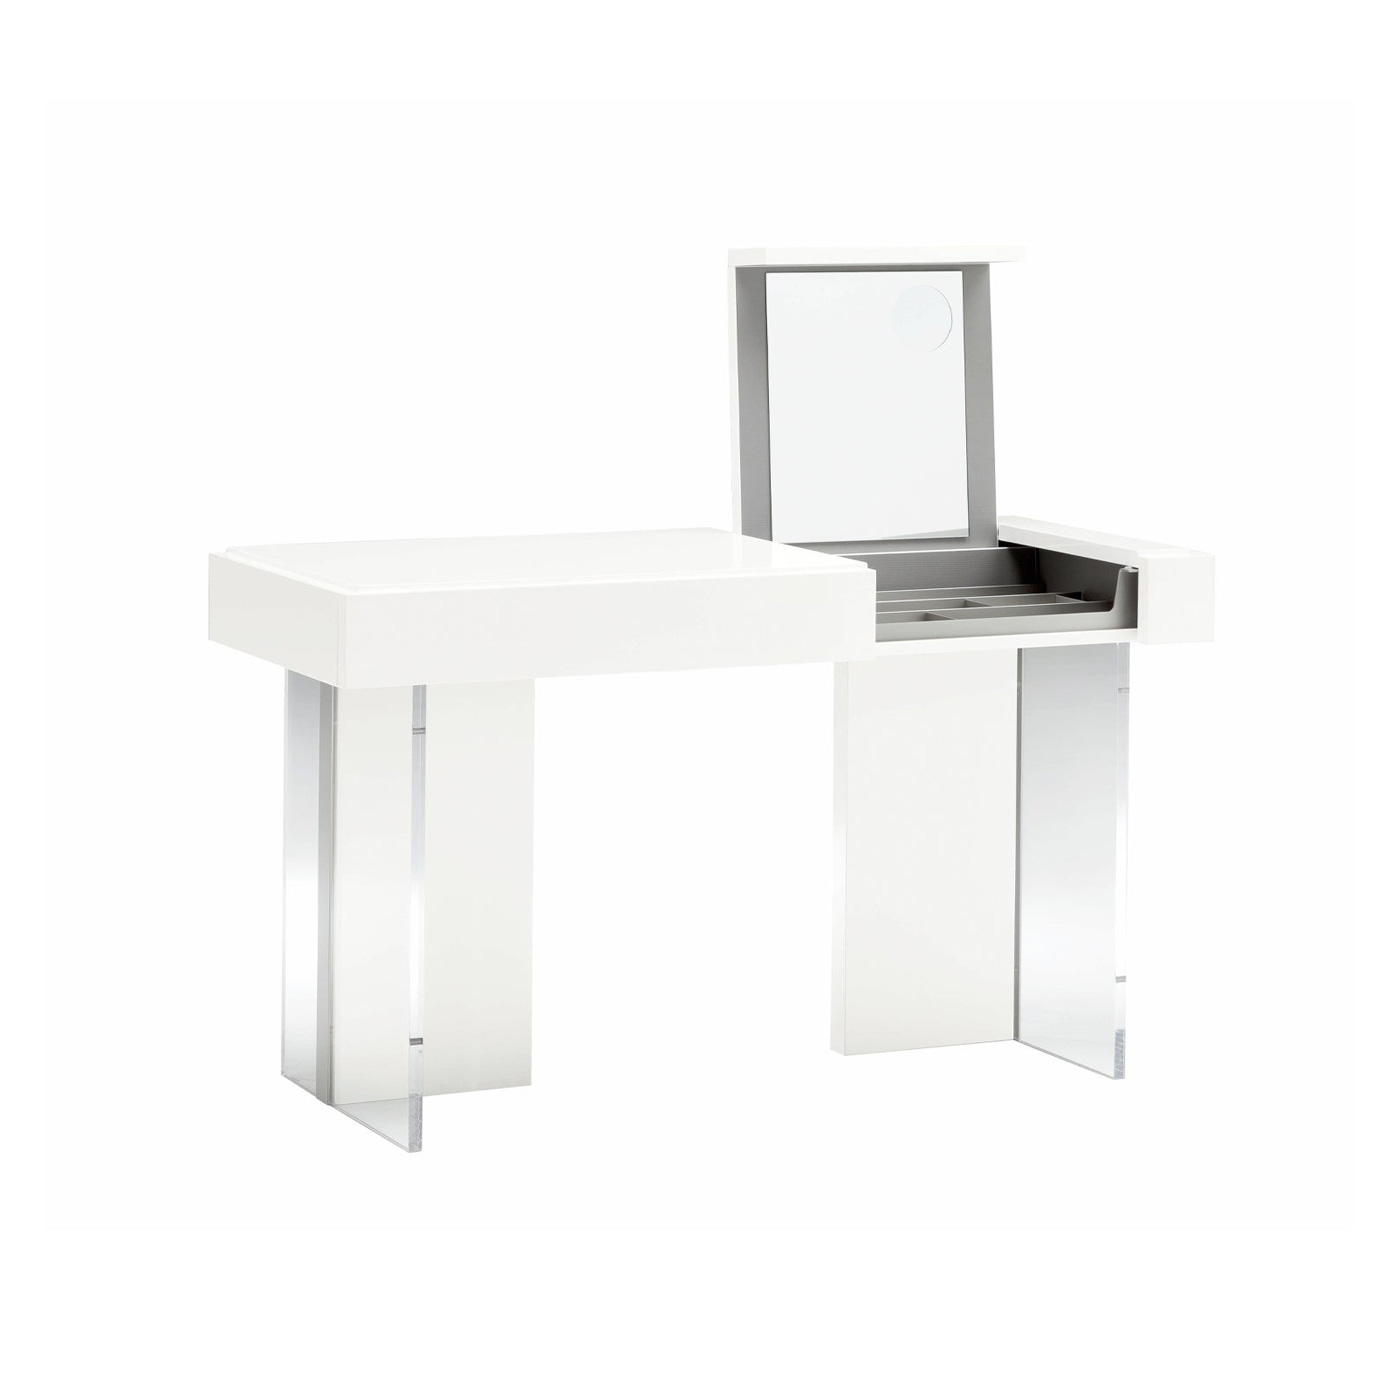 Dressing Tables & Stools Online